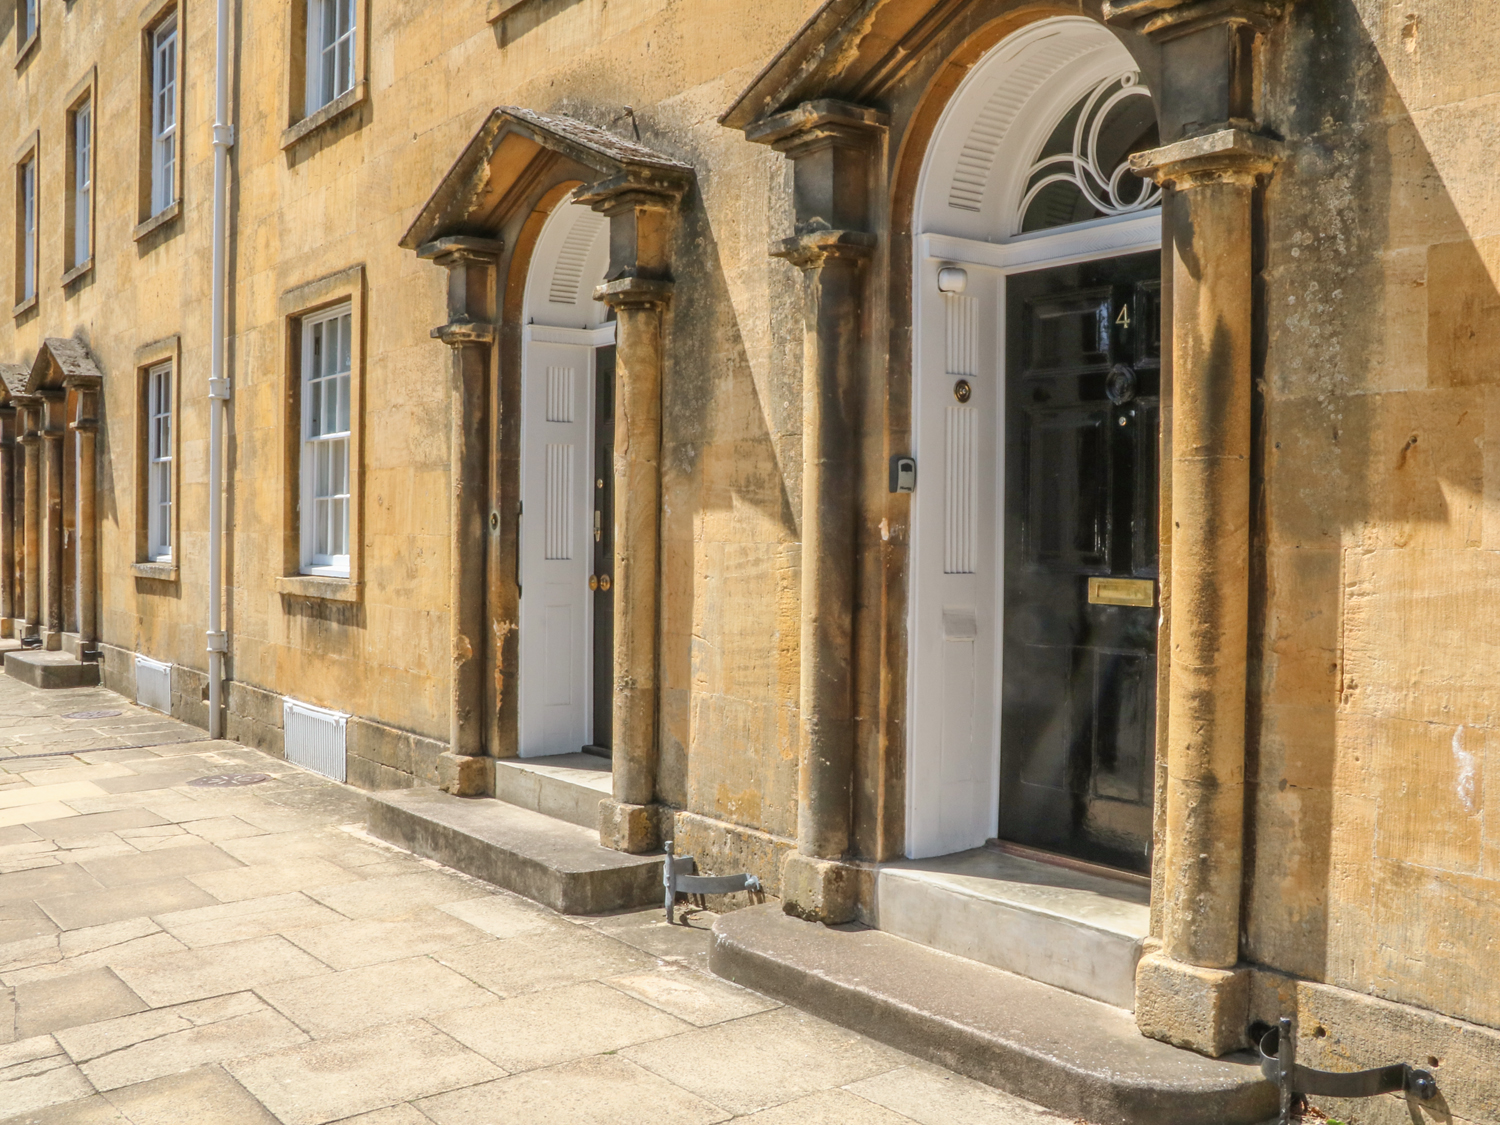 4 Maidens Row, Chipping Campden